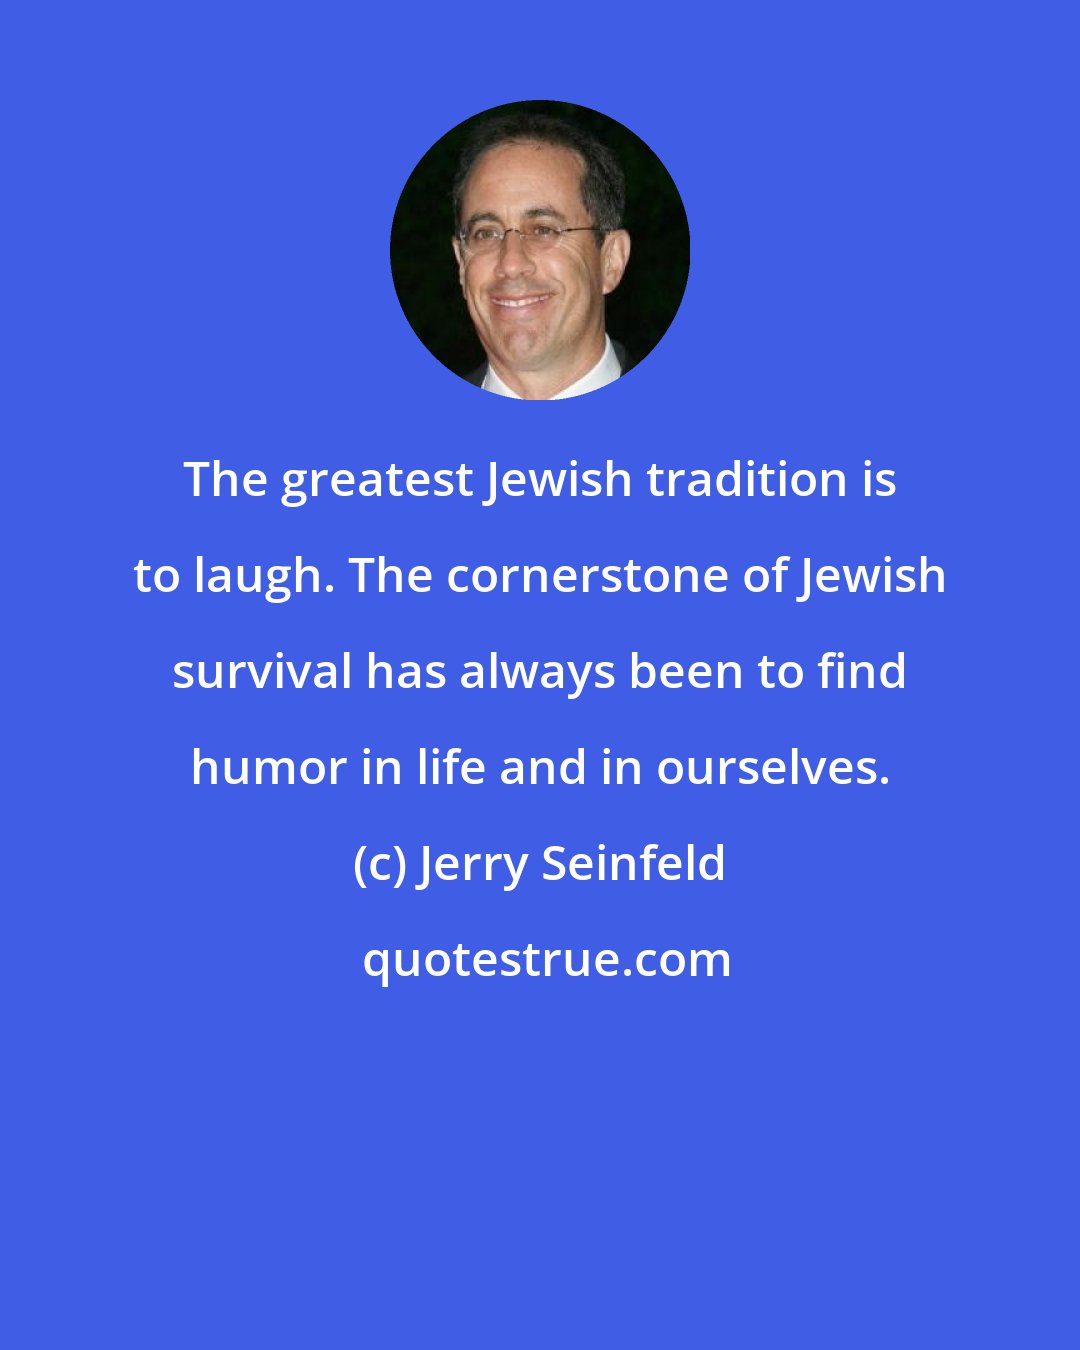 Jerry Seinfeld: The greatest Jewish tradition is to laugh. The cornerstone of Jewish survival has always been to find humor in life and in ourselves.